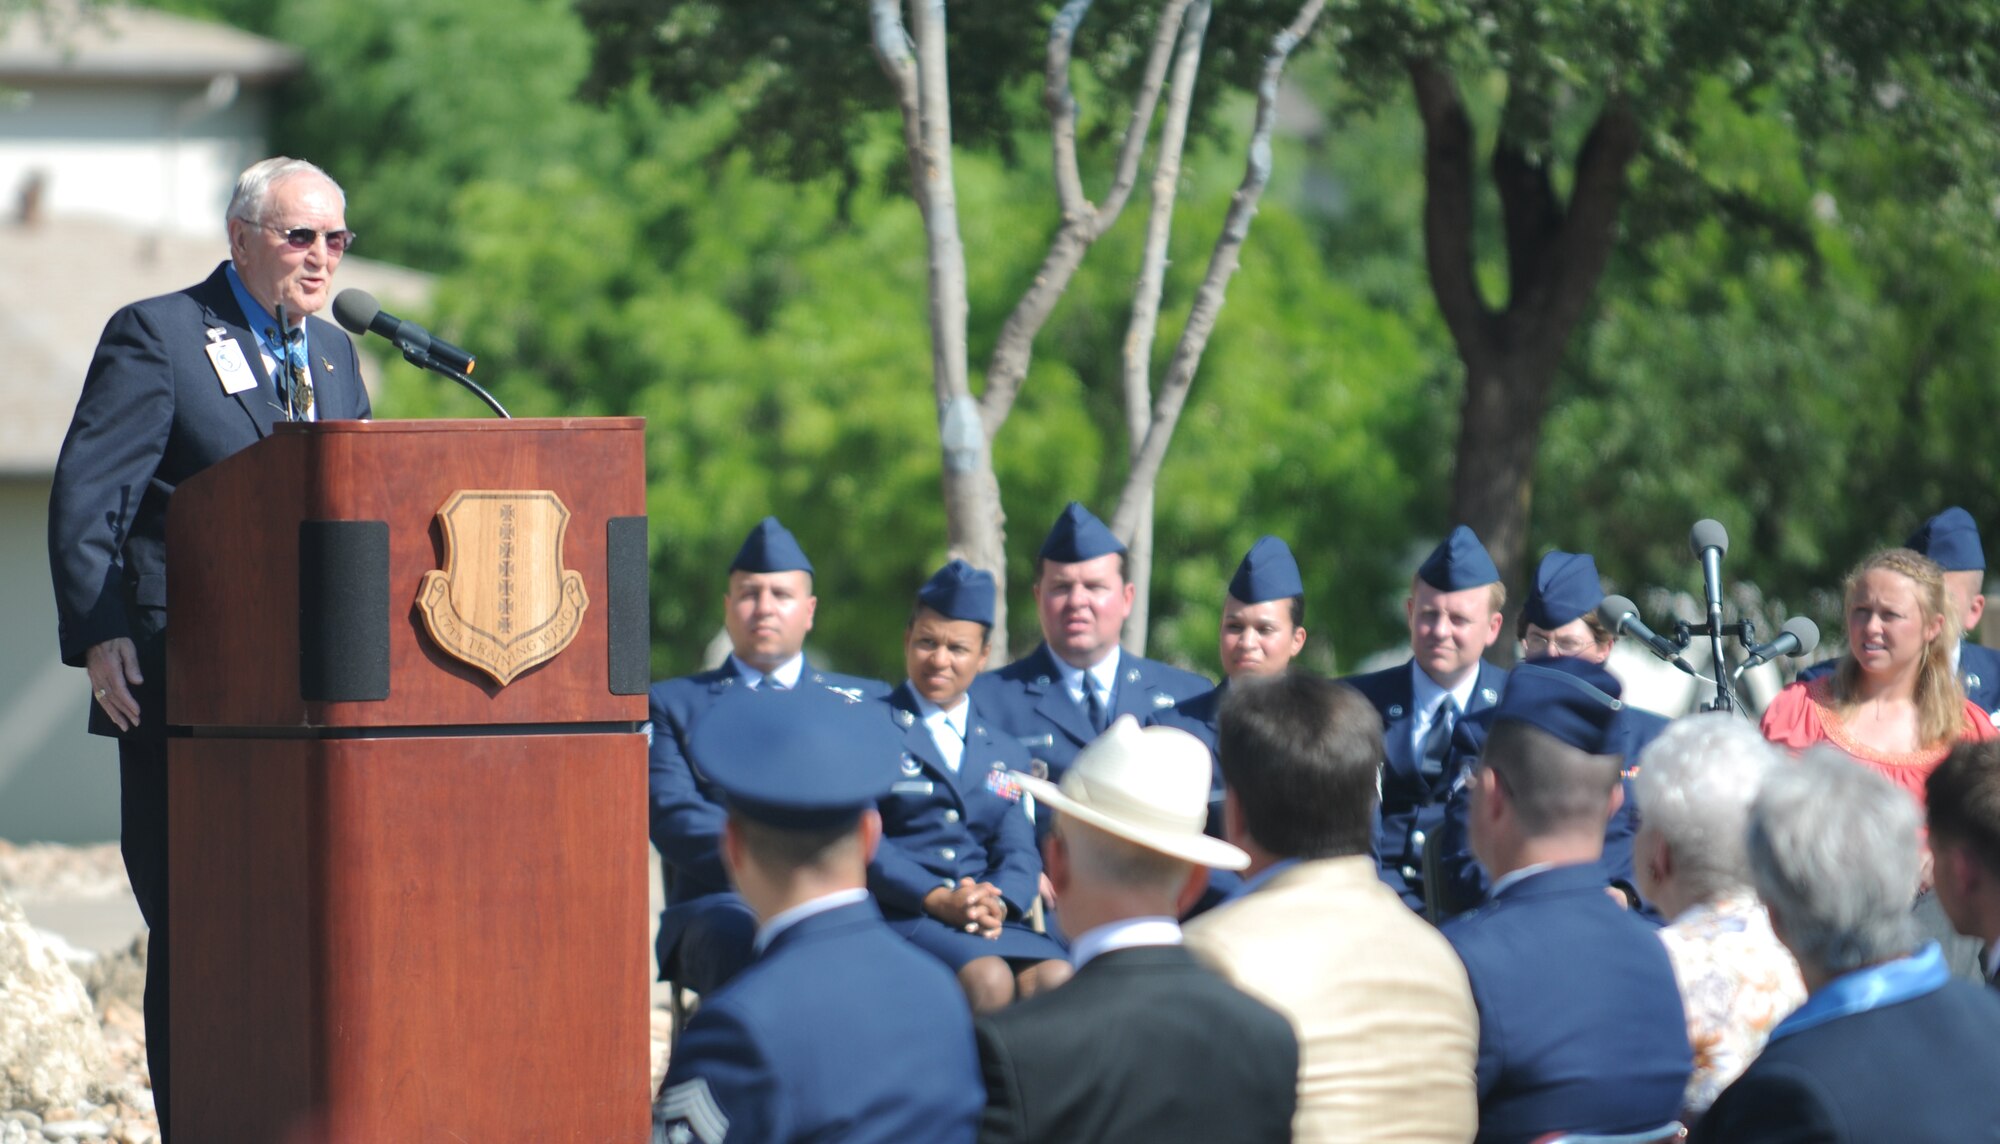 Medal of Honor recipient Col. George E. “Bud” Day speaks during a ceremony dedicating two buildings in honor of himself and fellow Medal of Honor recipient Col Leo Thorsness May 7 on Goodfellow AFB, Texas. (U.S. Air Force photo/Airman 1st Class Clayton Lenhardt) 